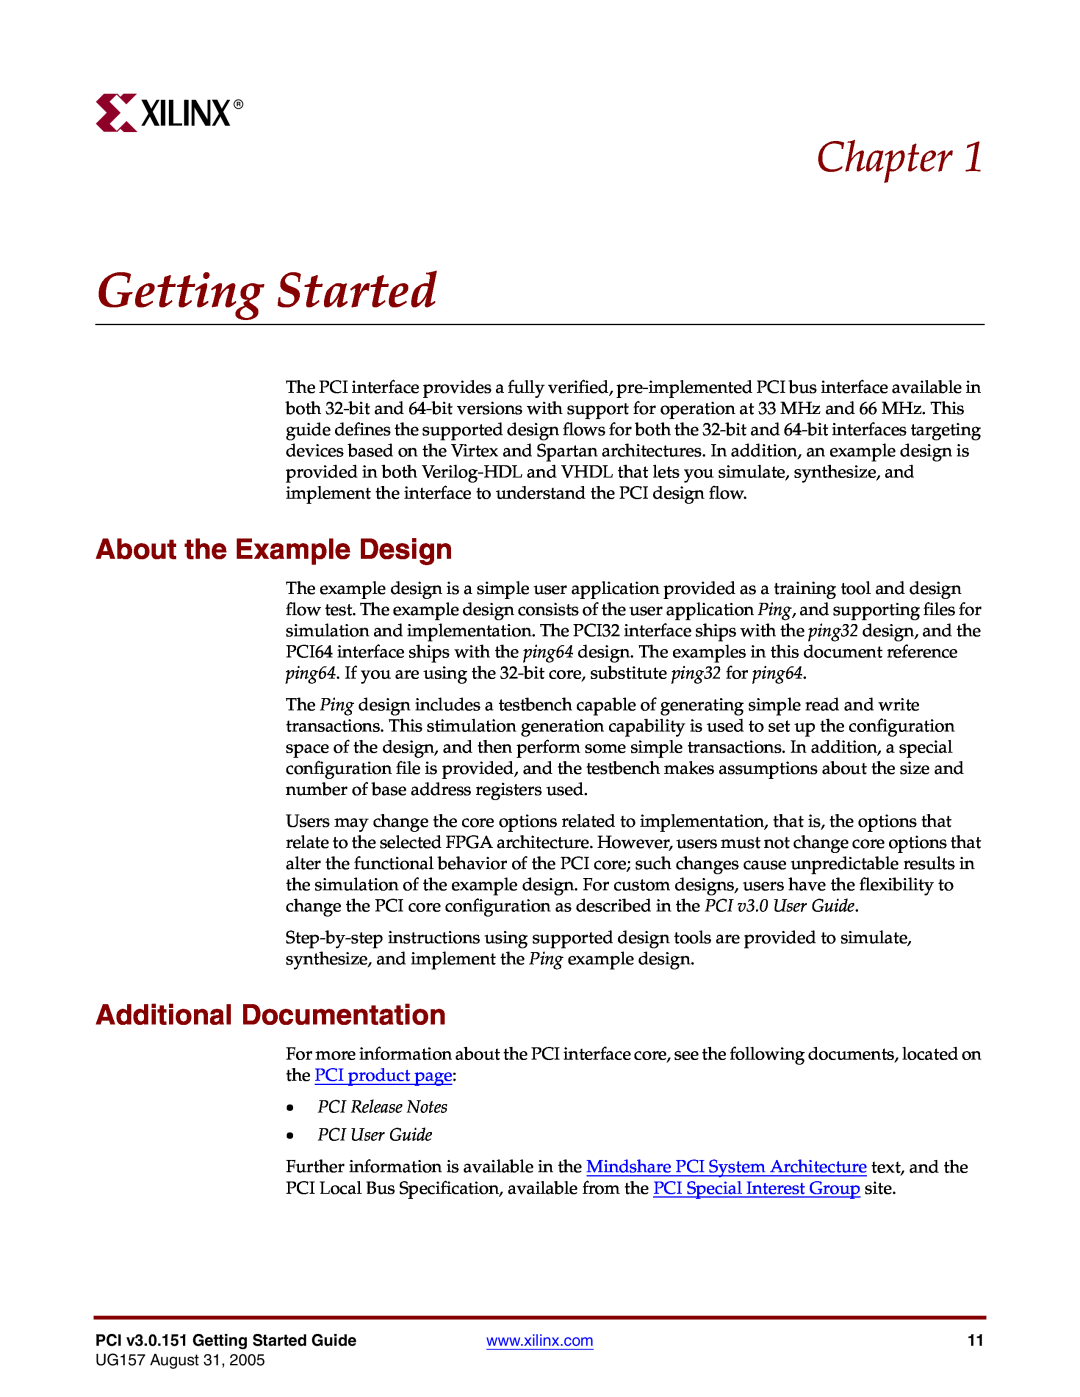 Xilinx PCI v3.0 manual Getting Started, Chapter, About the Example Design, Additional Documentation 